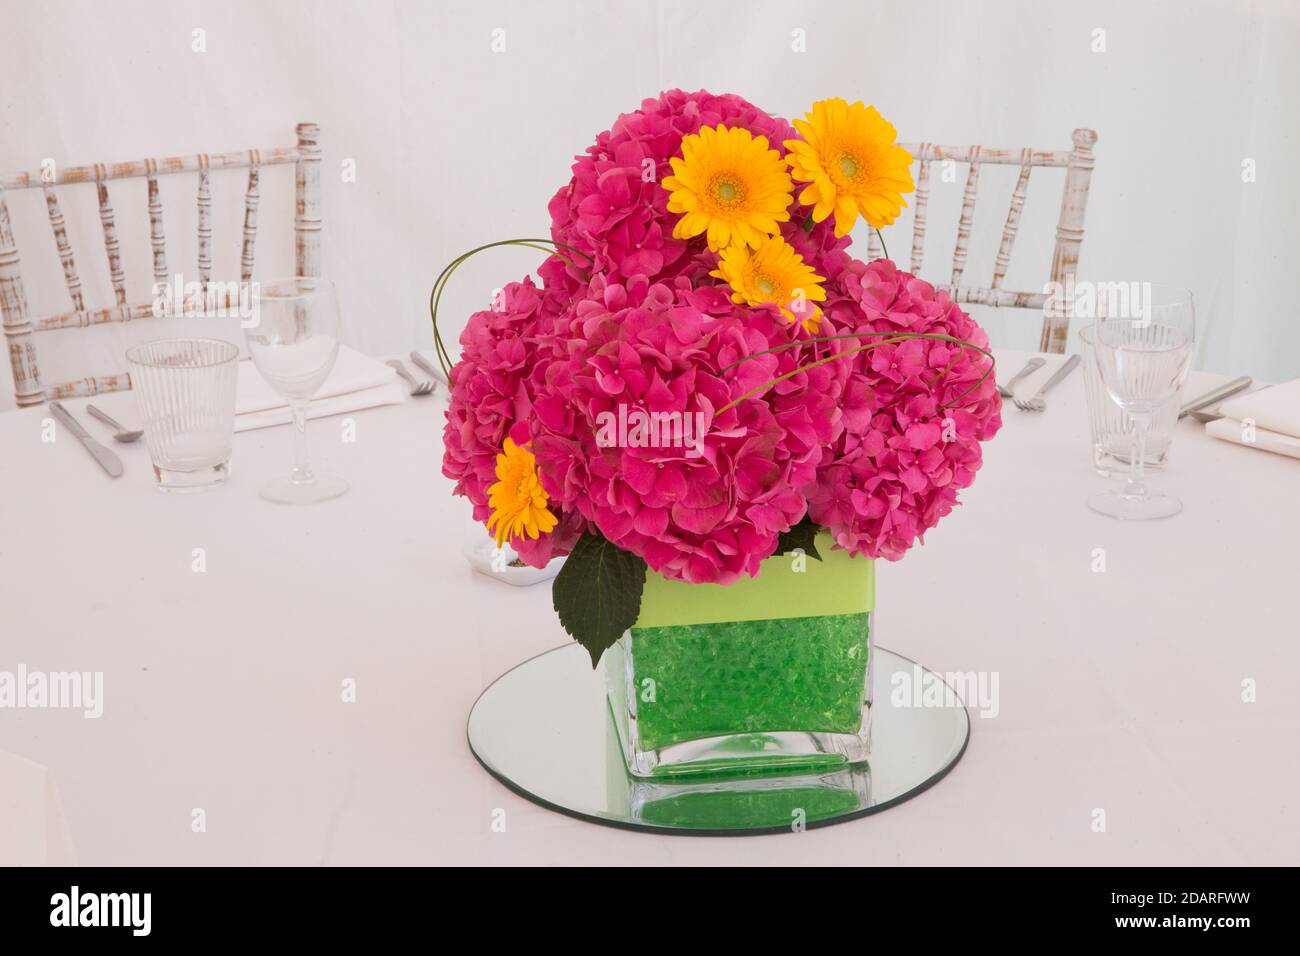 floral decoration on table Stock Photo